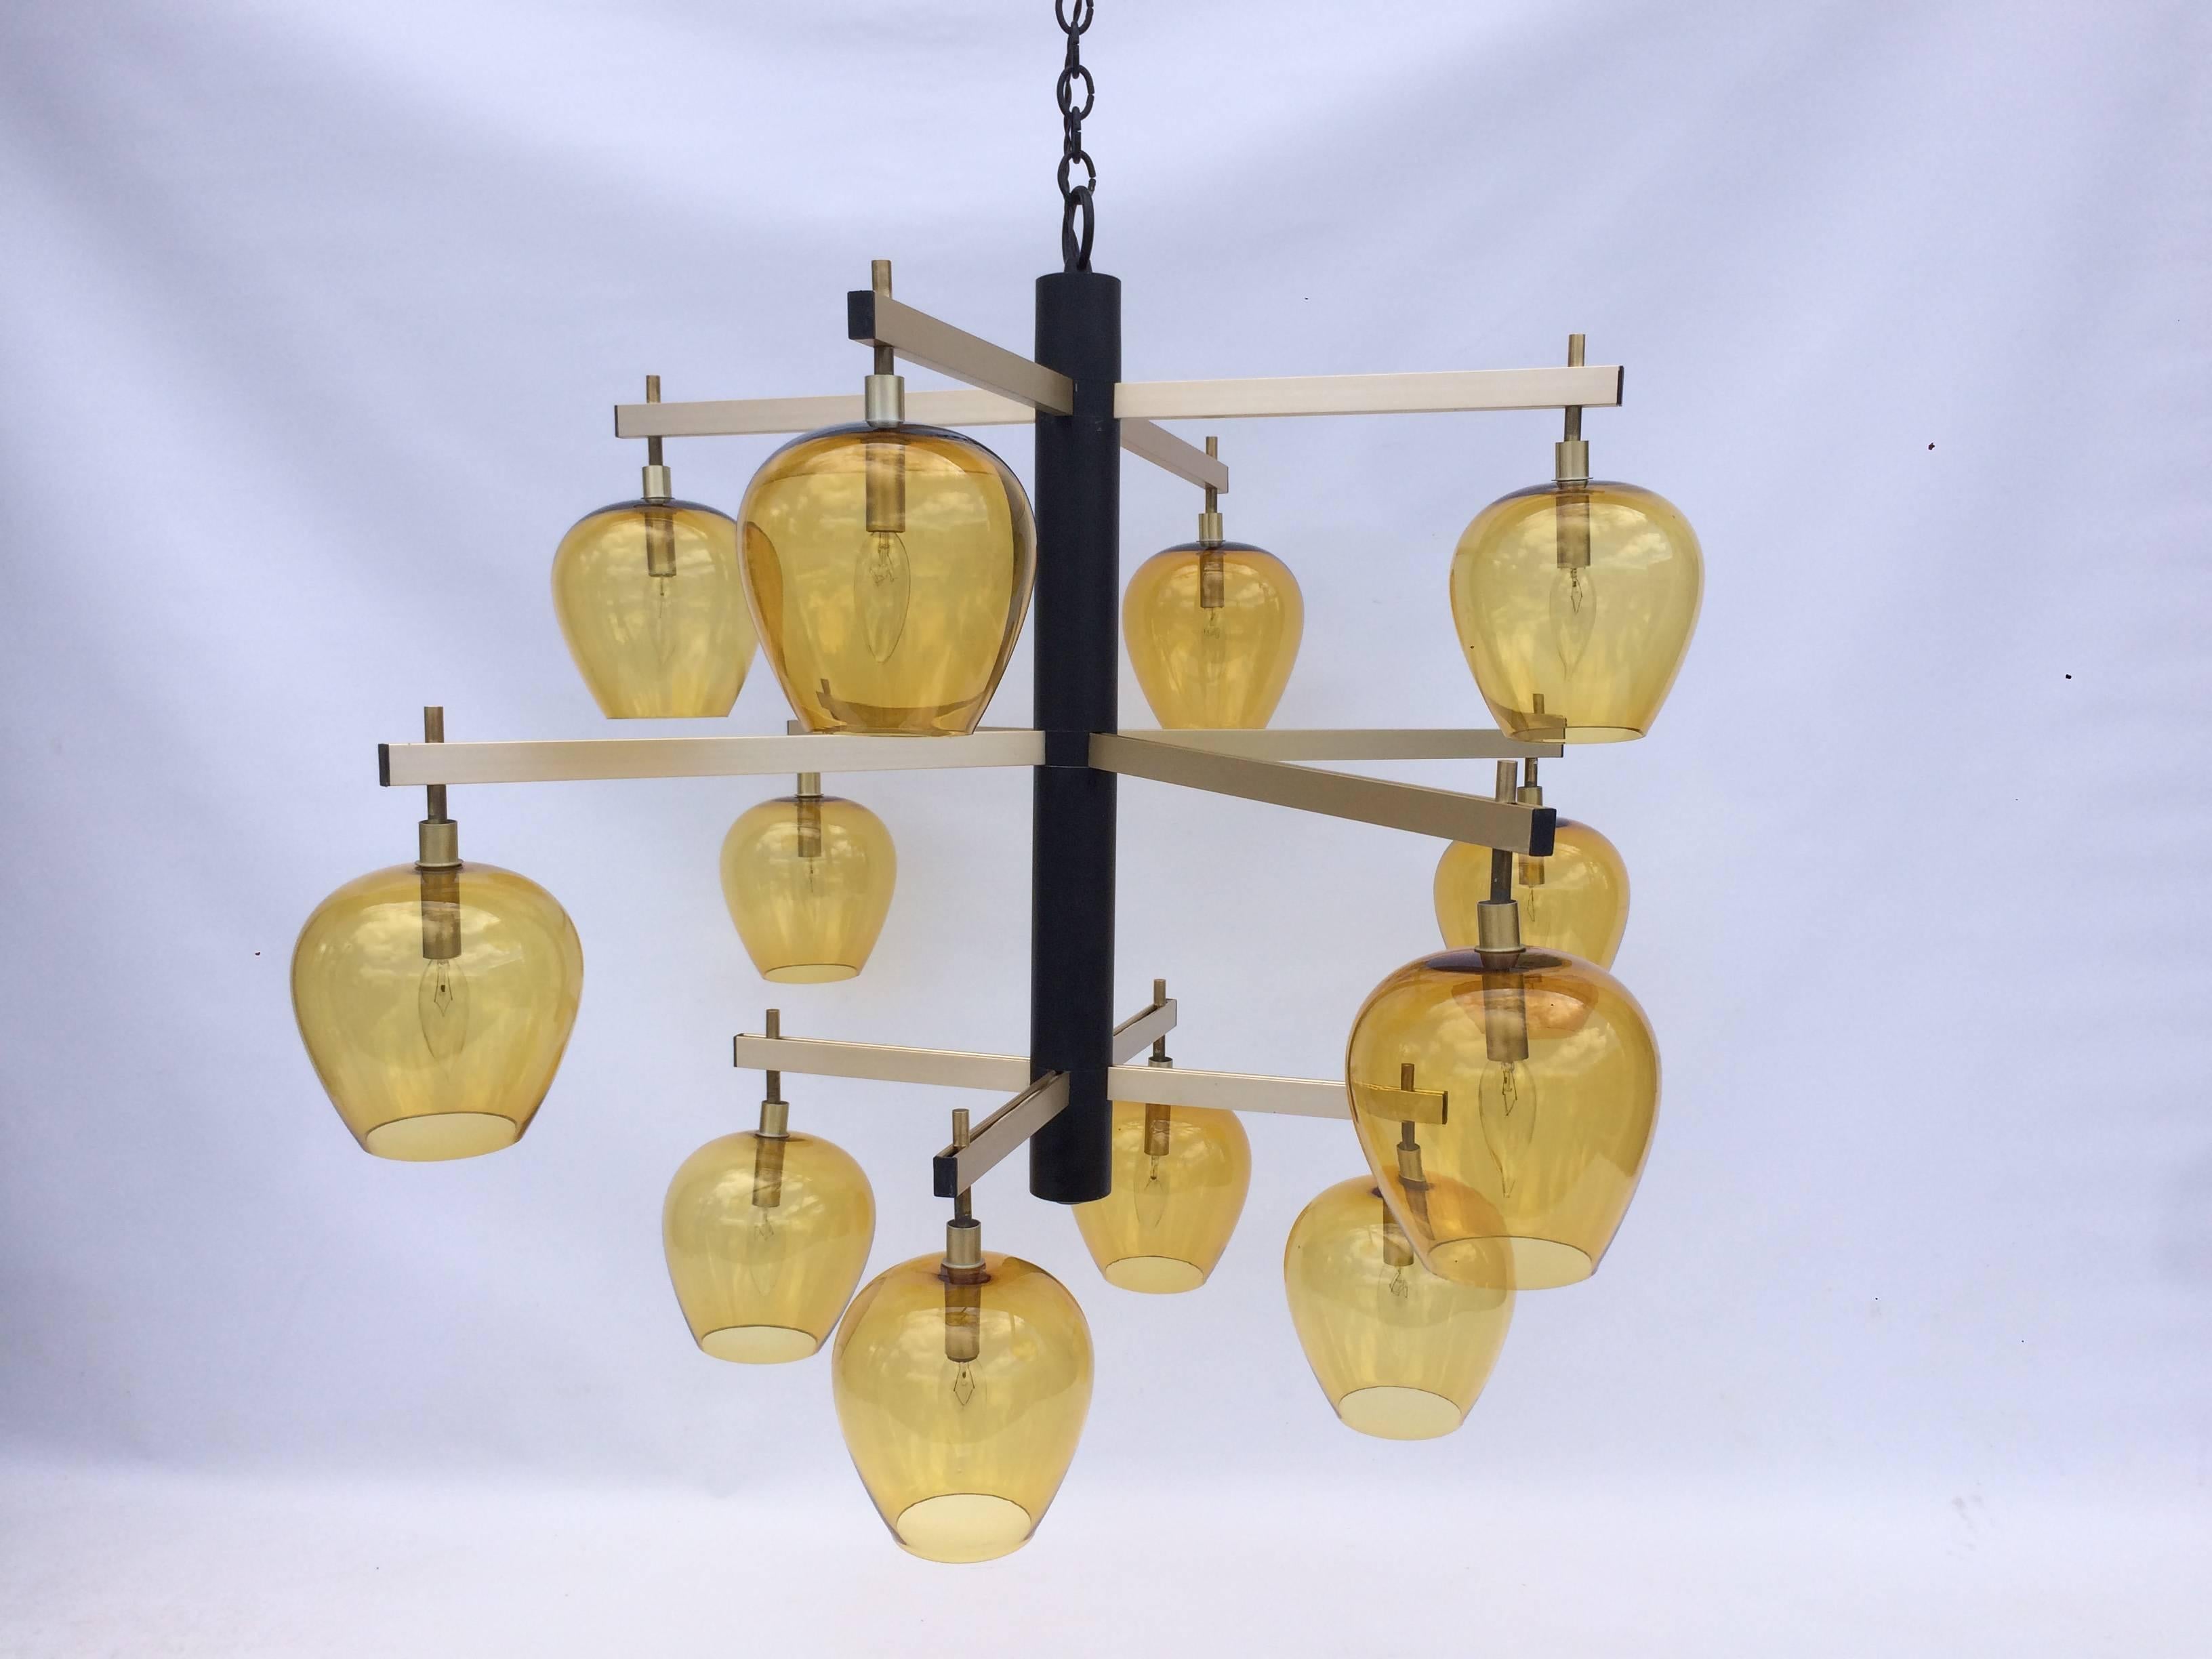 Chandelier has 12 arms which hold 12 amber glass shades. Chandelier comes a black chain and canopy. Chandelier has candelabra sockets.